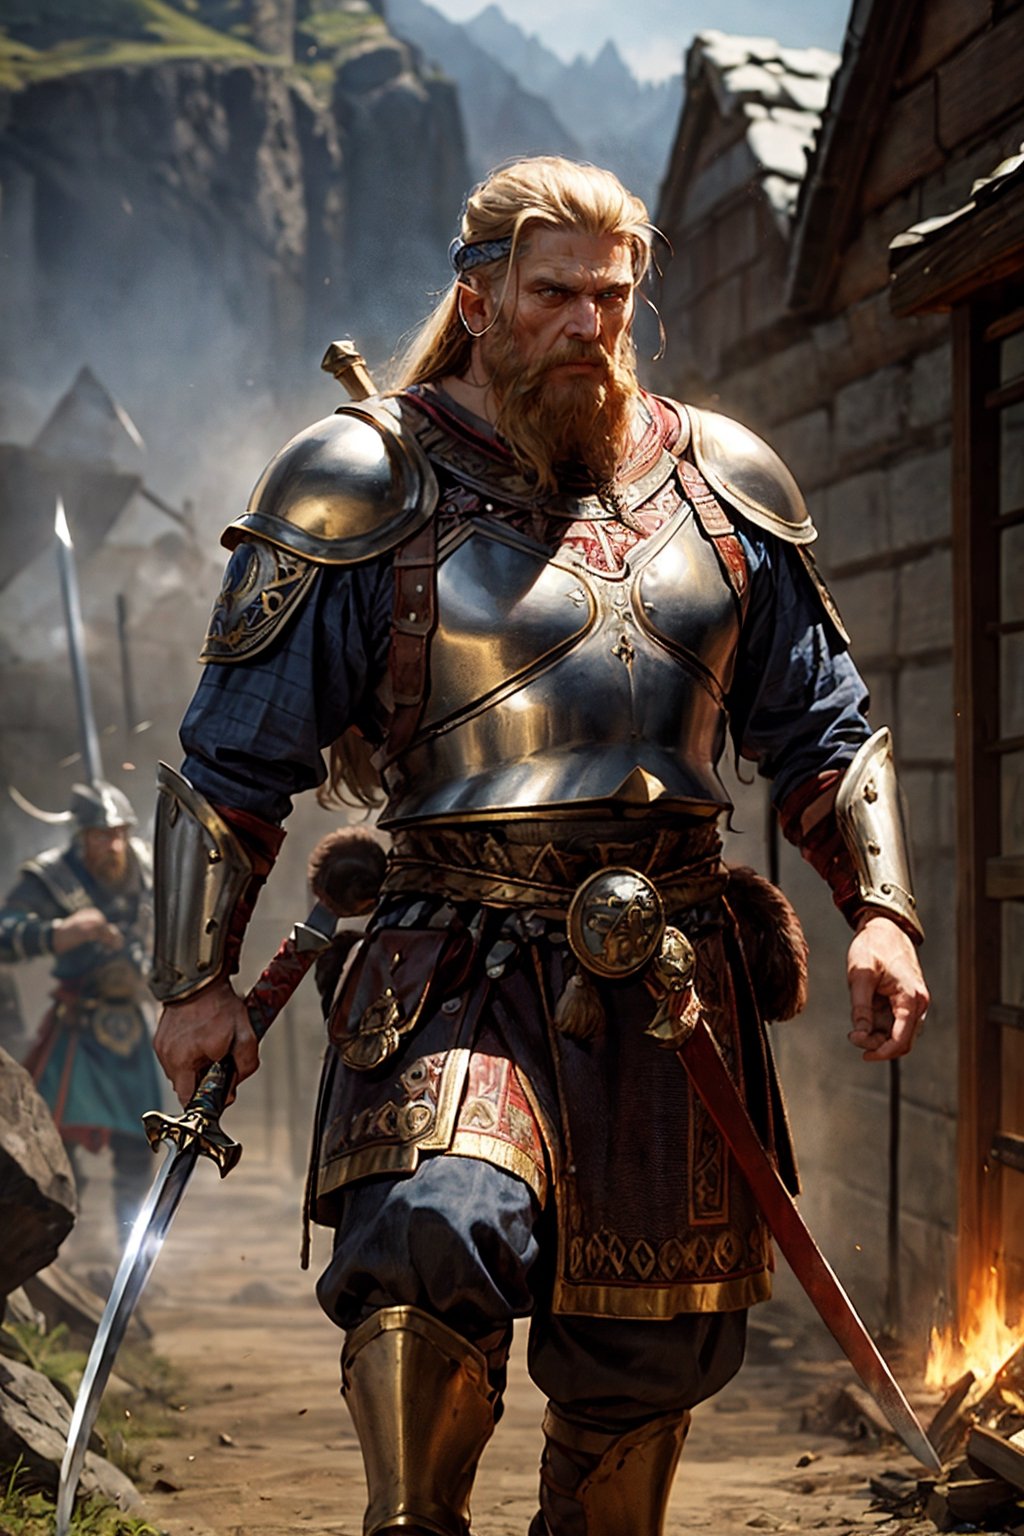 Slavs great Warrior,Slavic Armor,
handsome Elder Slavs,Viking clothes,Solo,
Extreme Detailed,shining metallic,
Warriors fought invaders to defend their homeland and suffered many wounds.
But in exchange for his many sacrifices, he was finally able to protect his family.,holding a sword